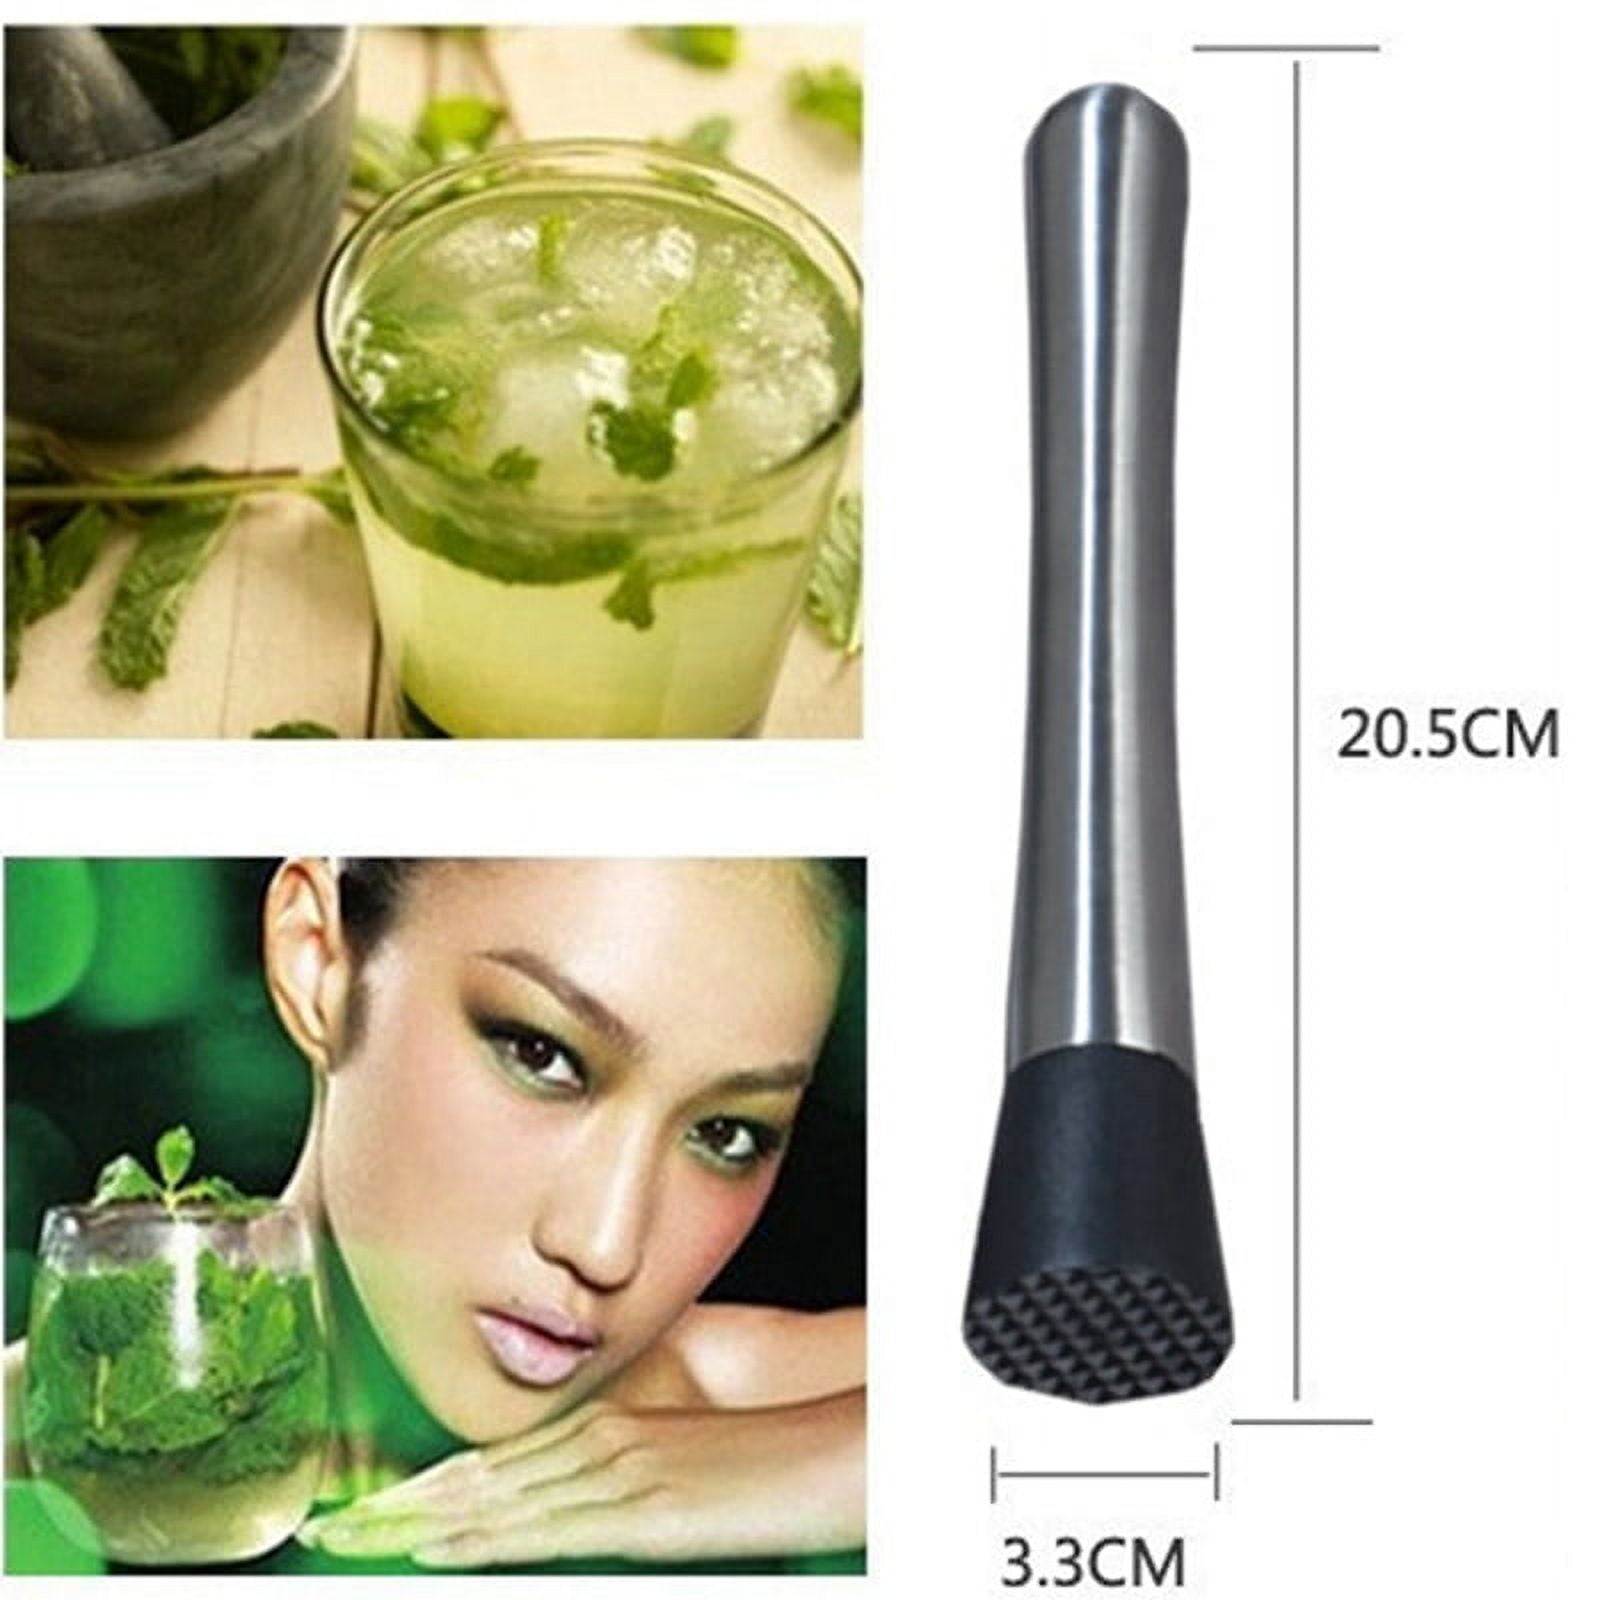  Barvivo Drink Muddler for Cocktails - 8 Inch Professional  Stainless Steel Muddler - Durable Cocktail Muddler Set Drink Smasher &  Mojito Muddler - Wine Accessories Ideal Valentines Day Gifts for Him